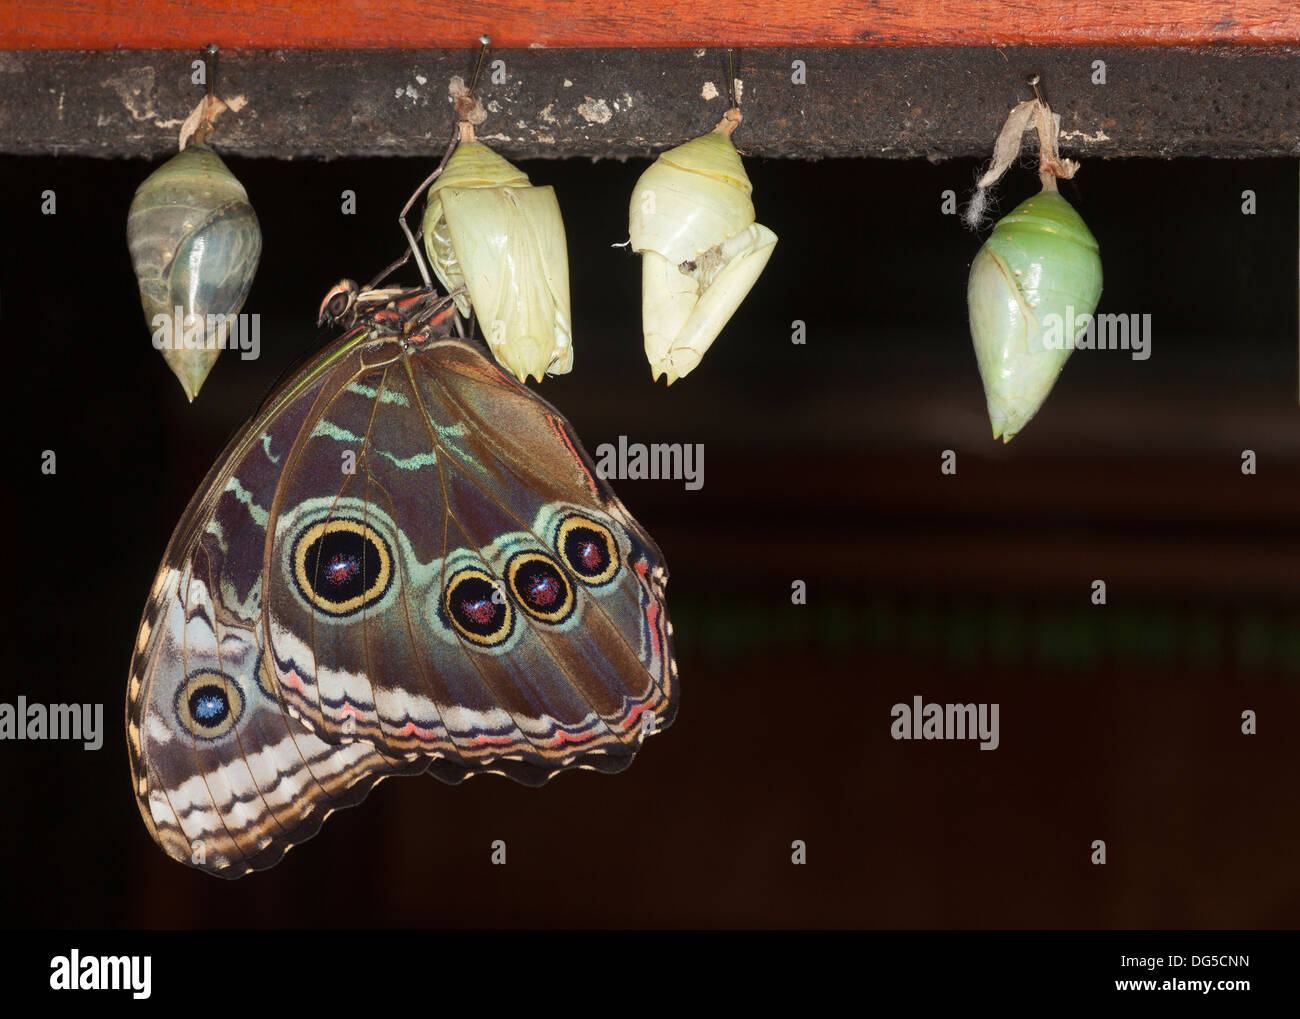 Blue Morpho butterfly (Morpho helenor marinita), newly emerged from chrysalis in a butterfly conservatory, Costa Rica Stock Photo